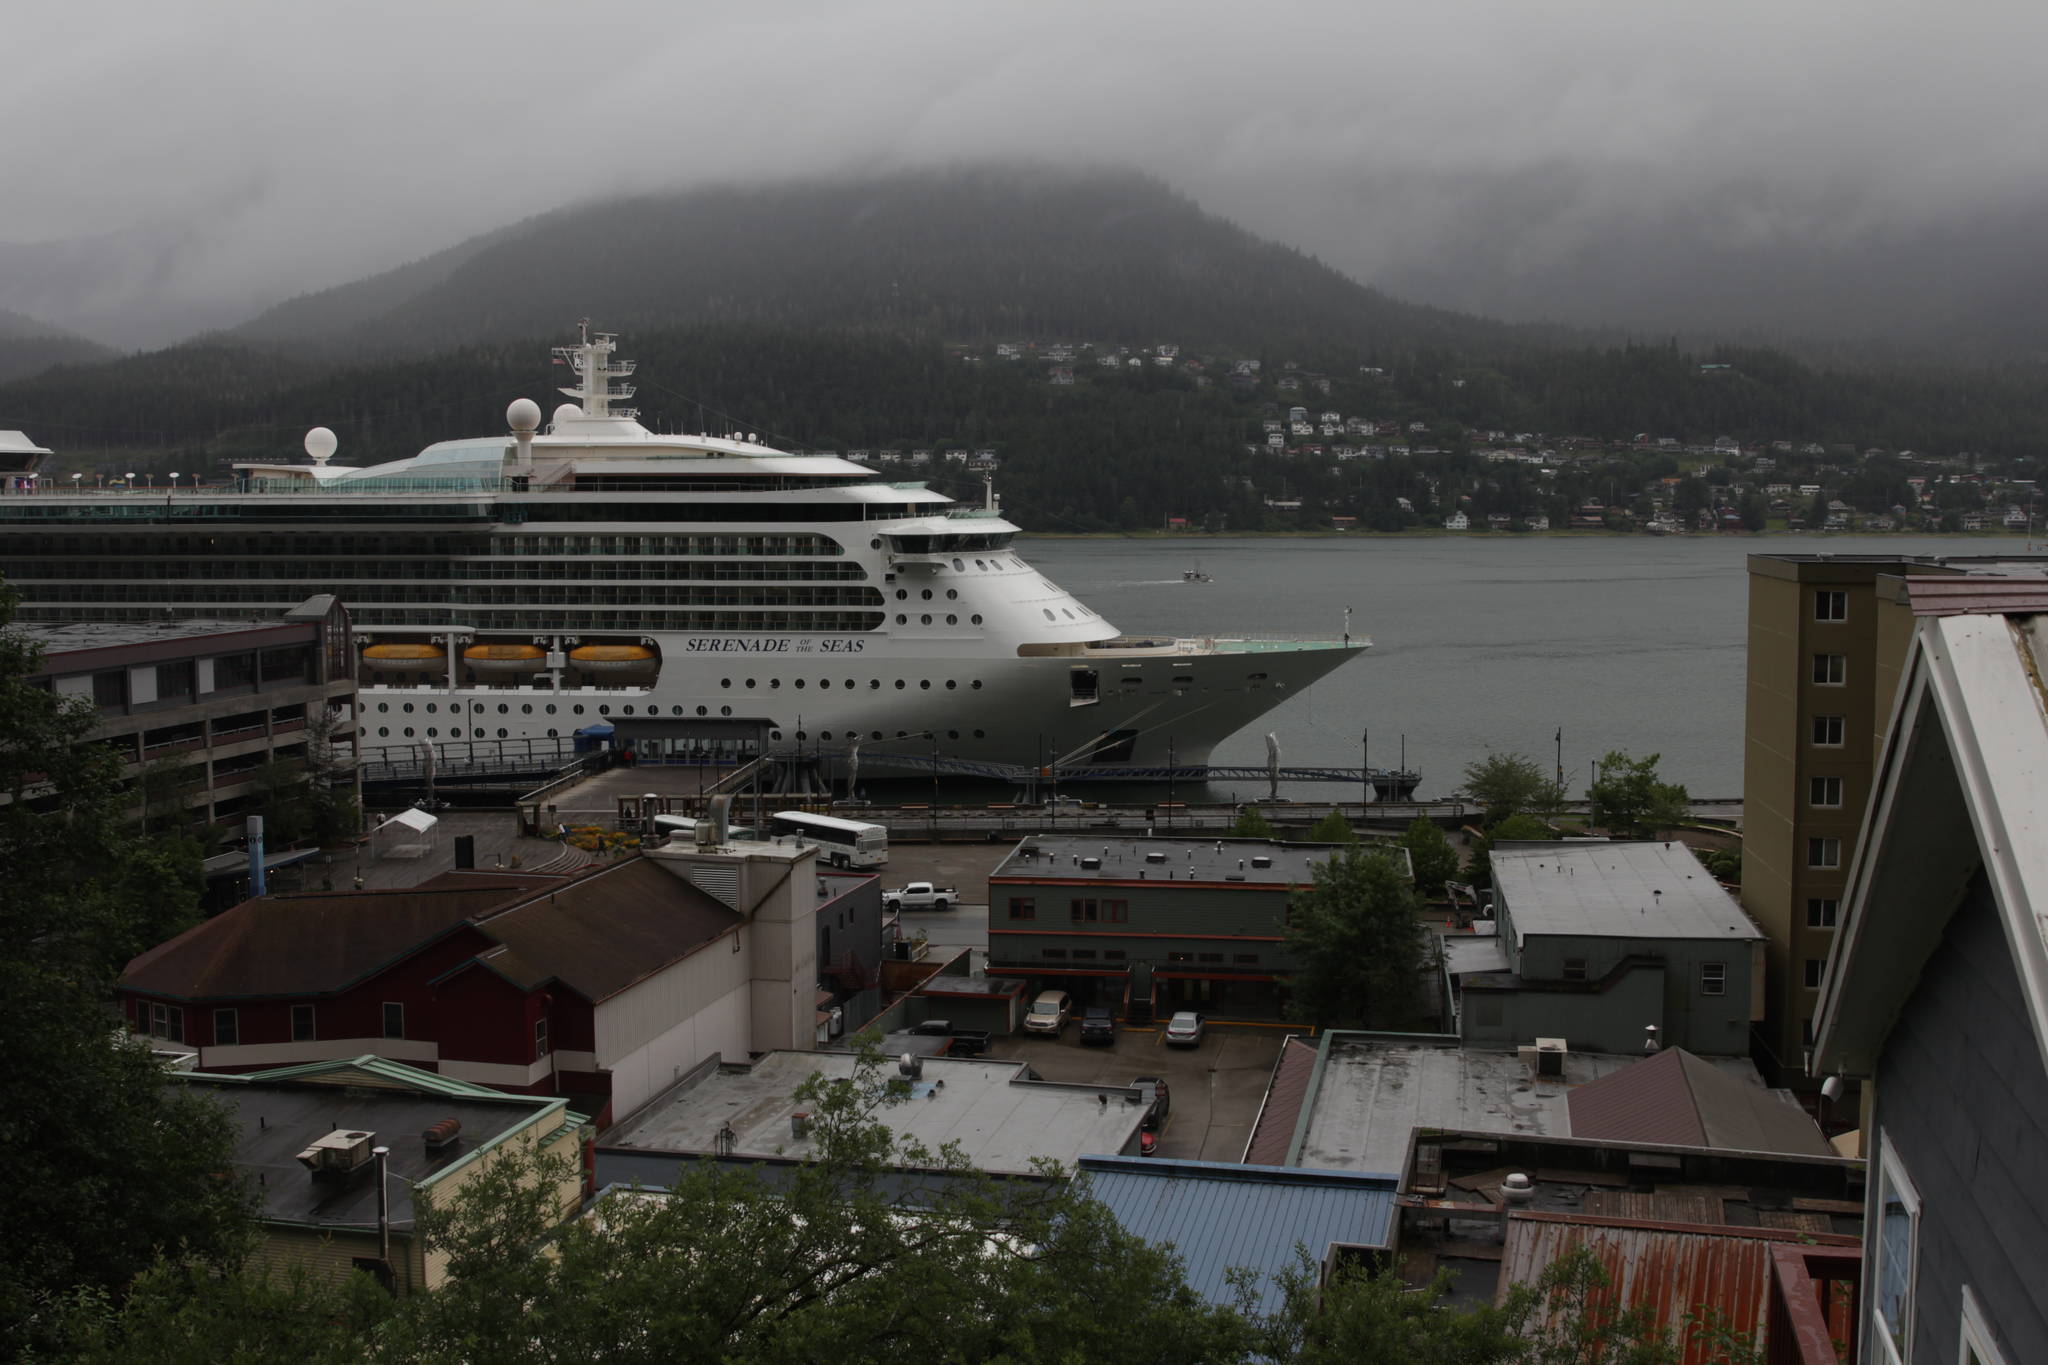 The Serenade of the Seas arrived in Juneau early Friday morning, seen here moored downtown. The Royal Caribbean cruise ship is the first large cruise ship to come to Juneau since the pandemic caused the cancellation of the 2020 cruise ship season and delayed the 2021 season. (Michael S. Lockett / Juneau Empire)